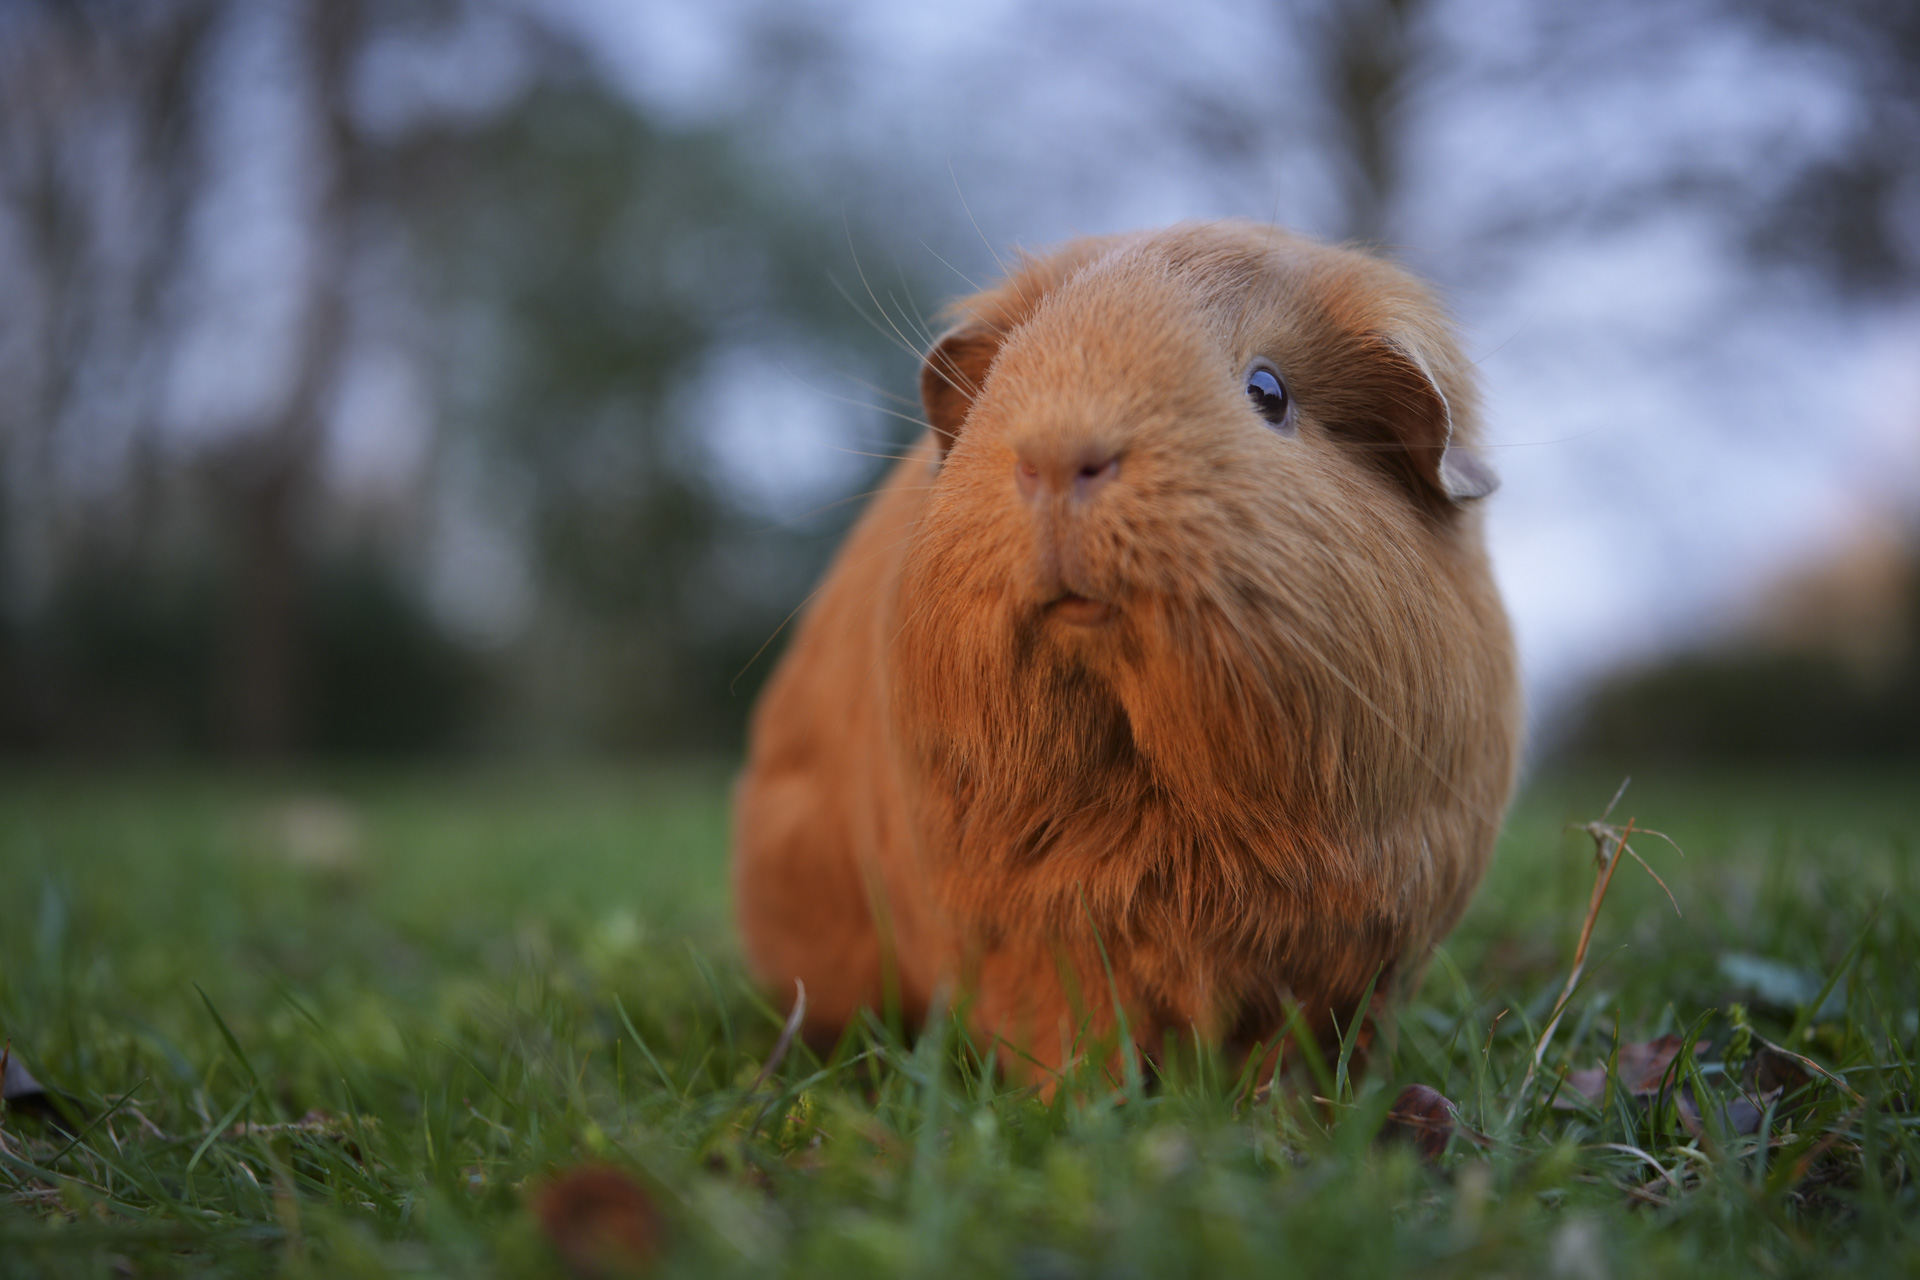 Guinea pig from ground level on a grass lawn with shallow depth of field